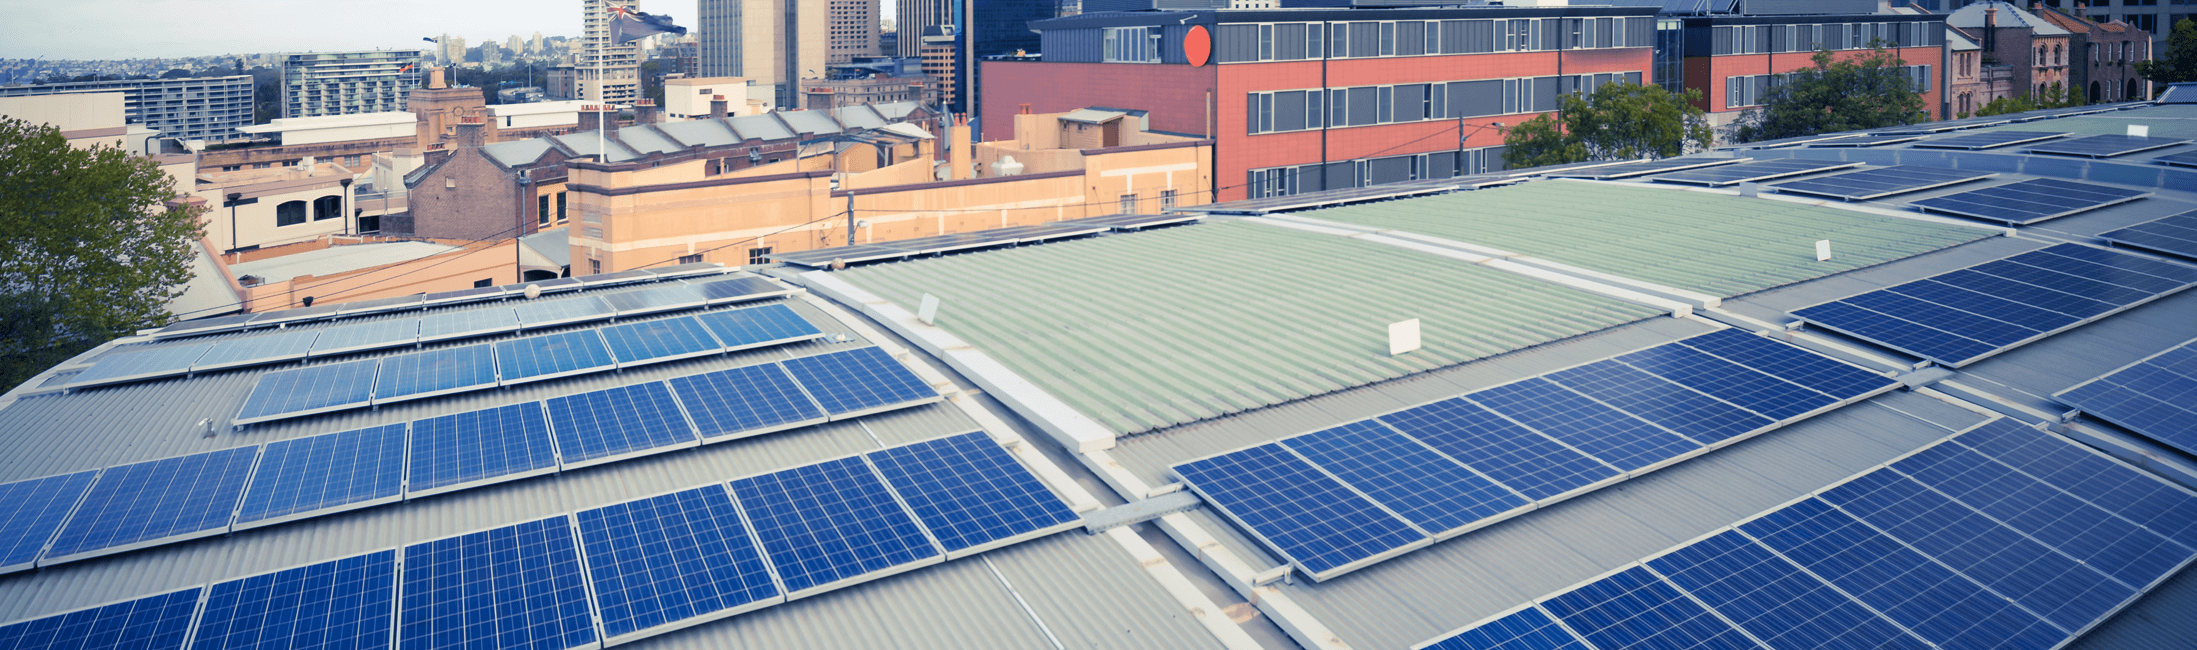 5 common commercial solar installation mistakes